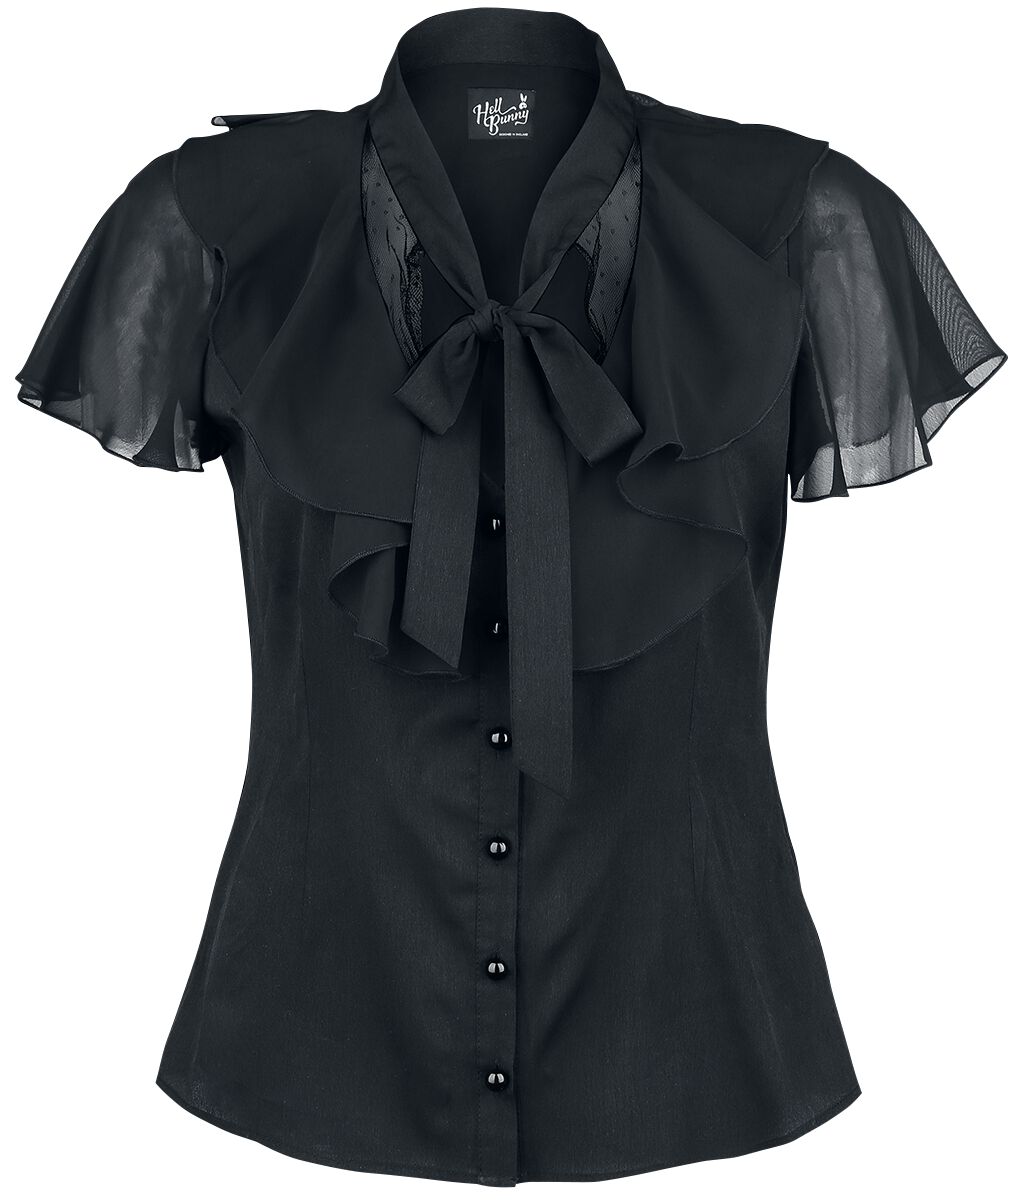 Hell Bunny Evanora Blouse Bluse schwarz in L